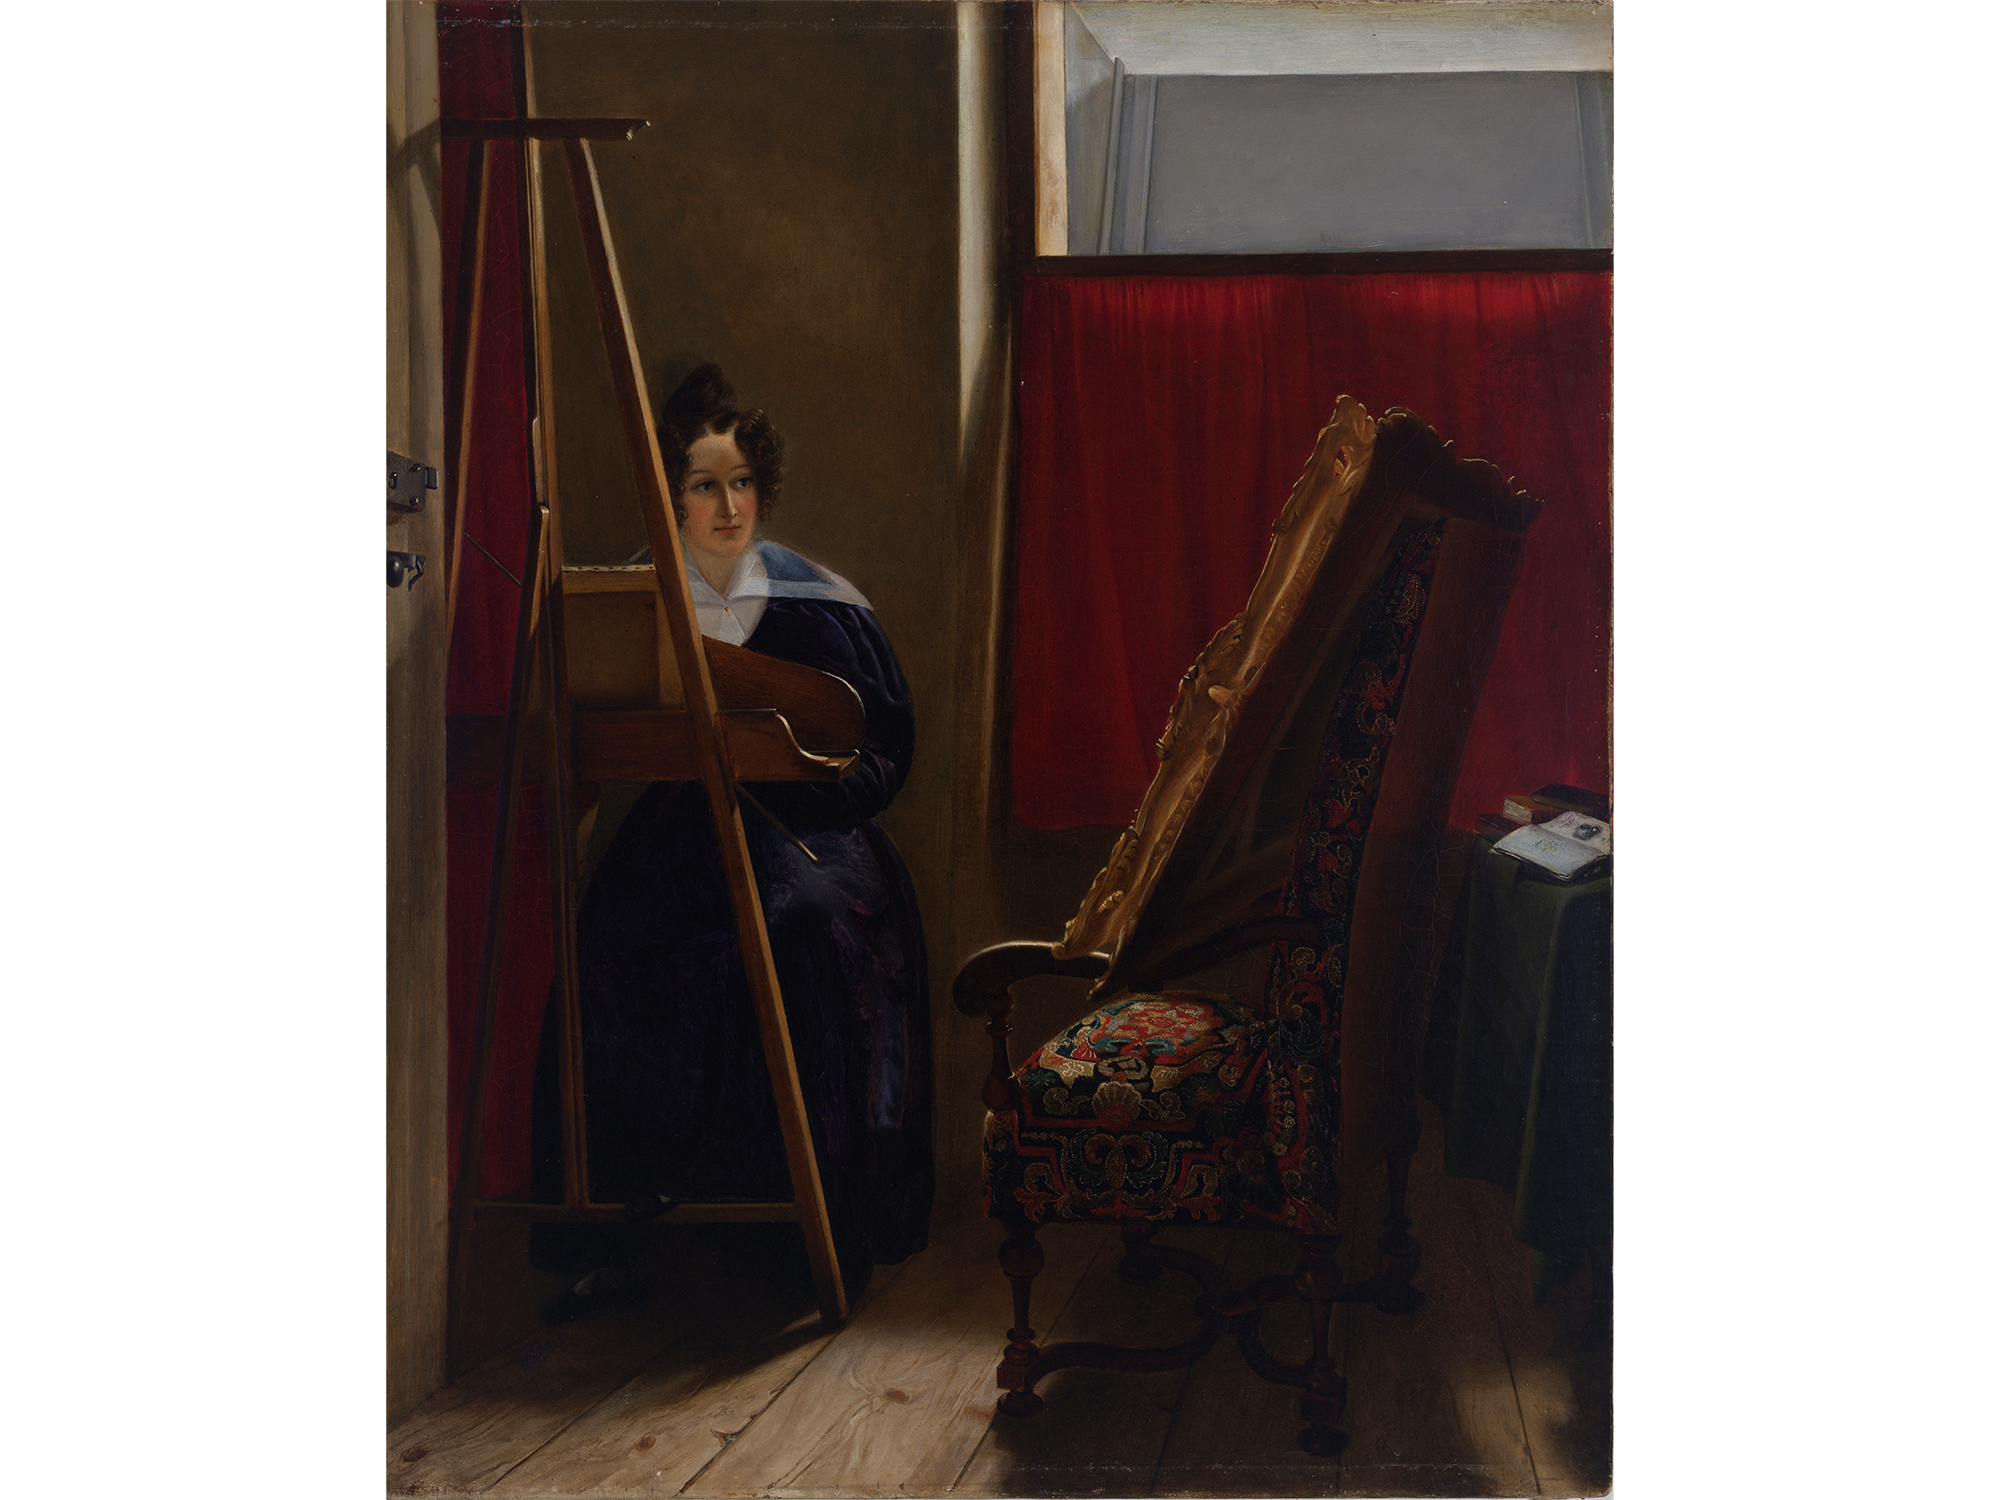 Painting of a woman sitting and painting at an easel